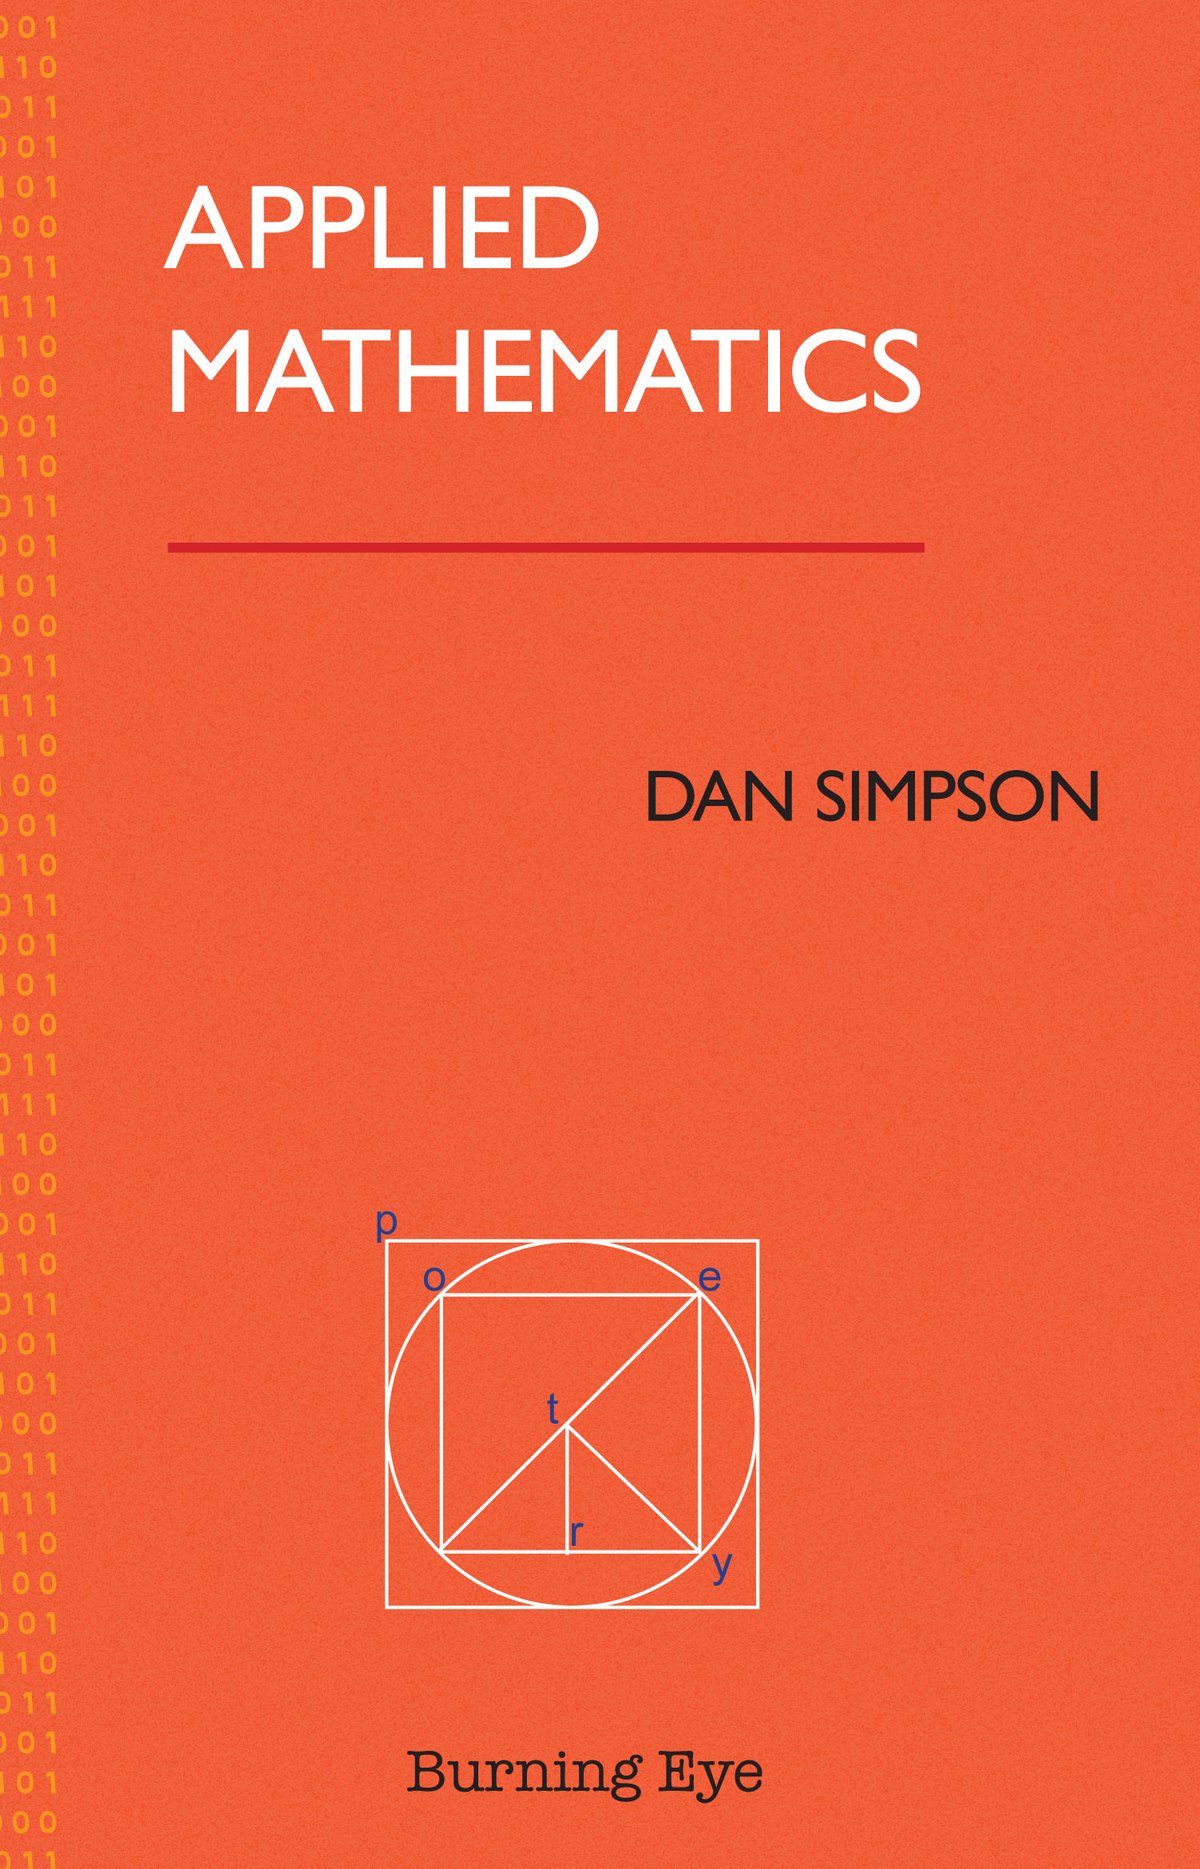 Image of Applied Mathematics by Dan Simpson